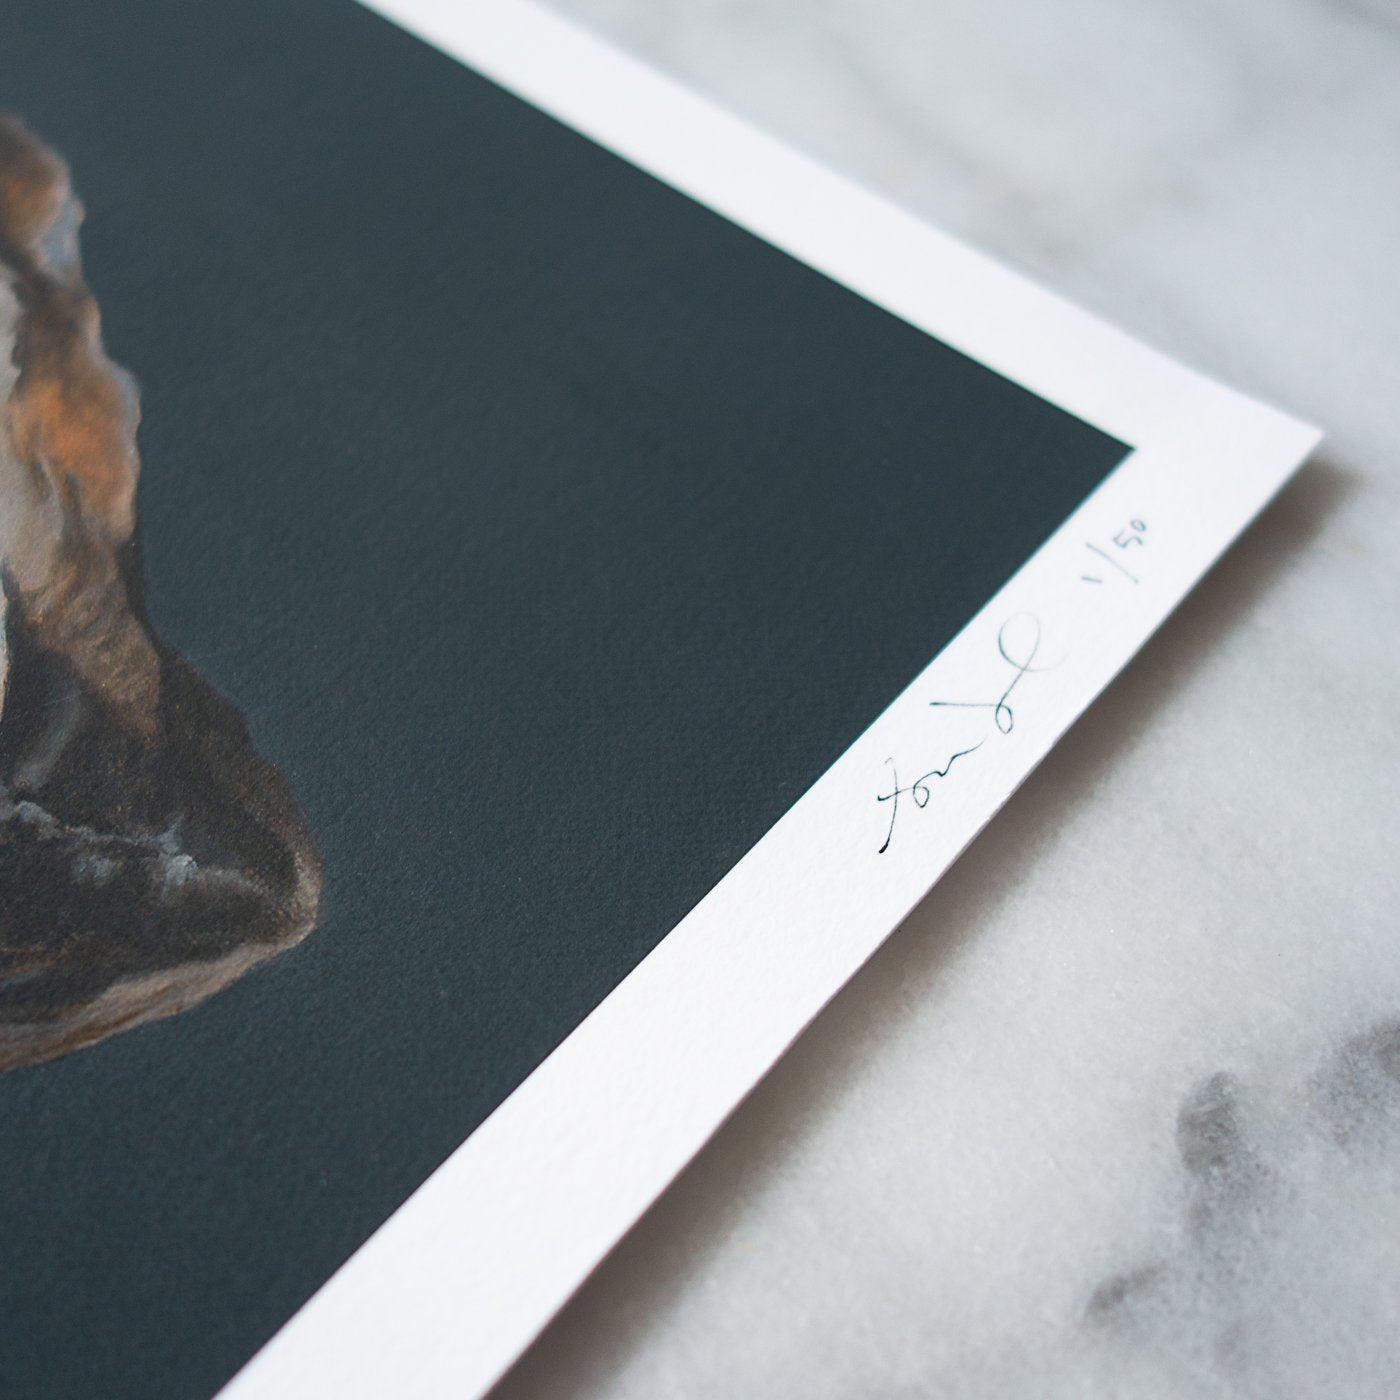 Set of 2 Shell Limited Edition Prints | Mussel Shell & Oyster Shell No. 3